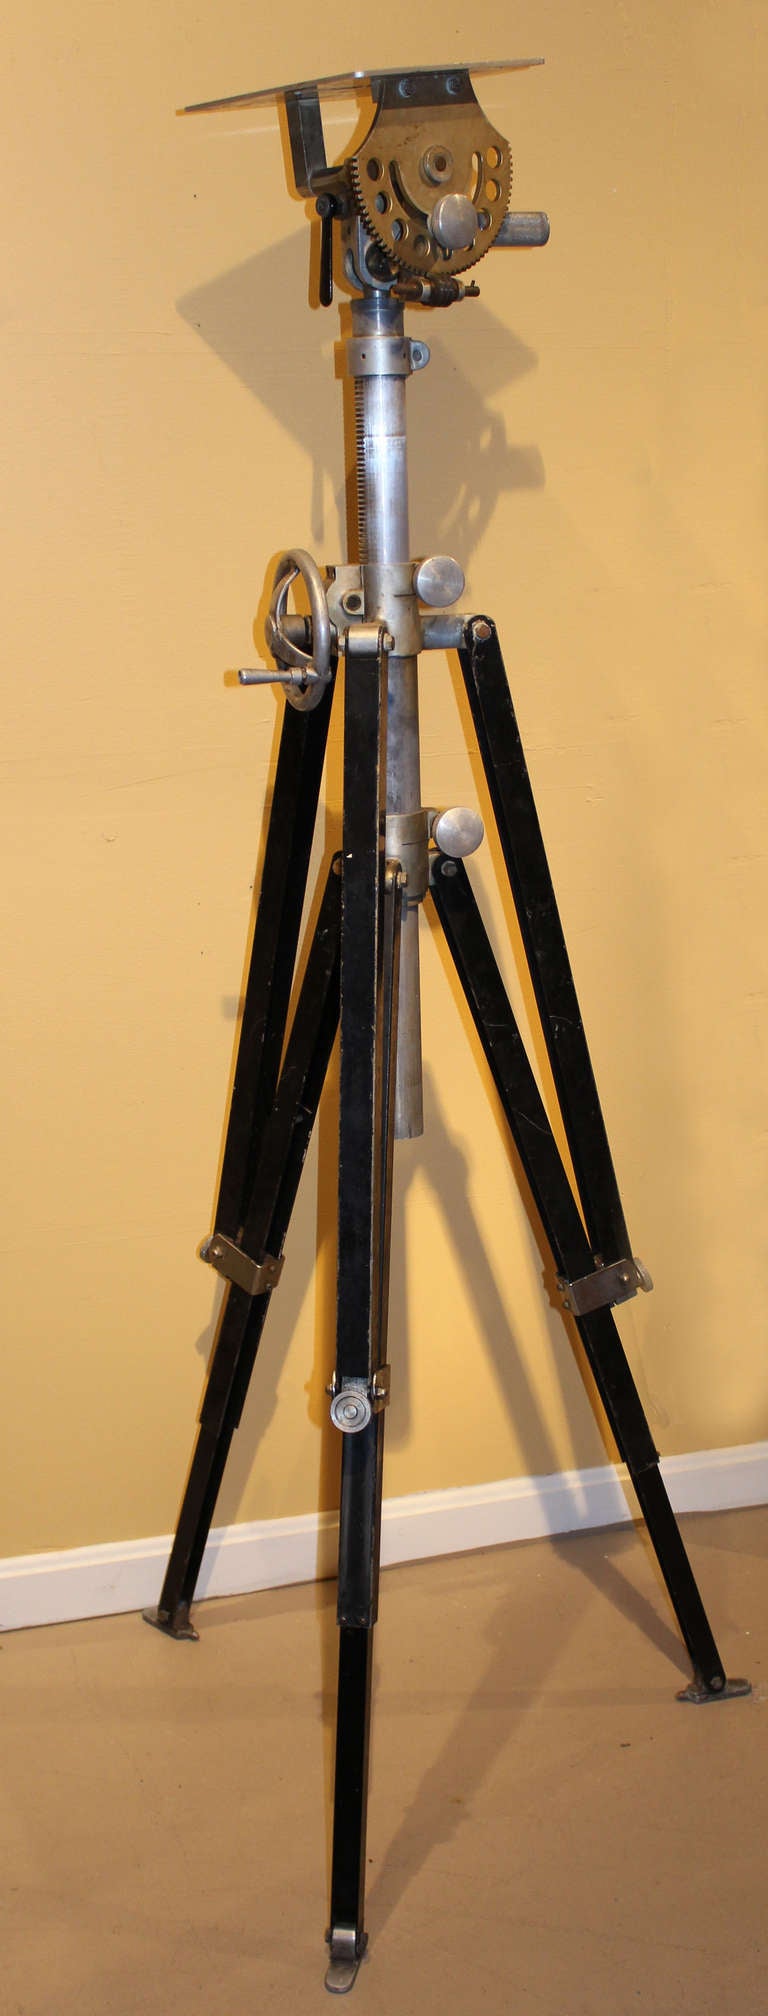 This heavy tripod of metal construction was used for Fastax high speed photography and movie cameras. The tripod has a plaque on the leg reading “Fastax Tripod” and the top of the tripod is marked C-284. These cameras were used in the 1950”™s and